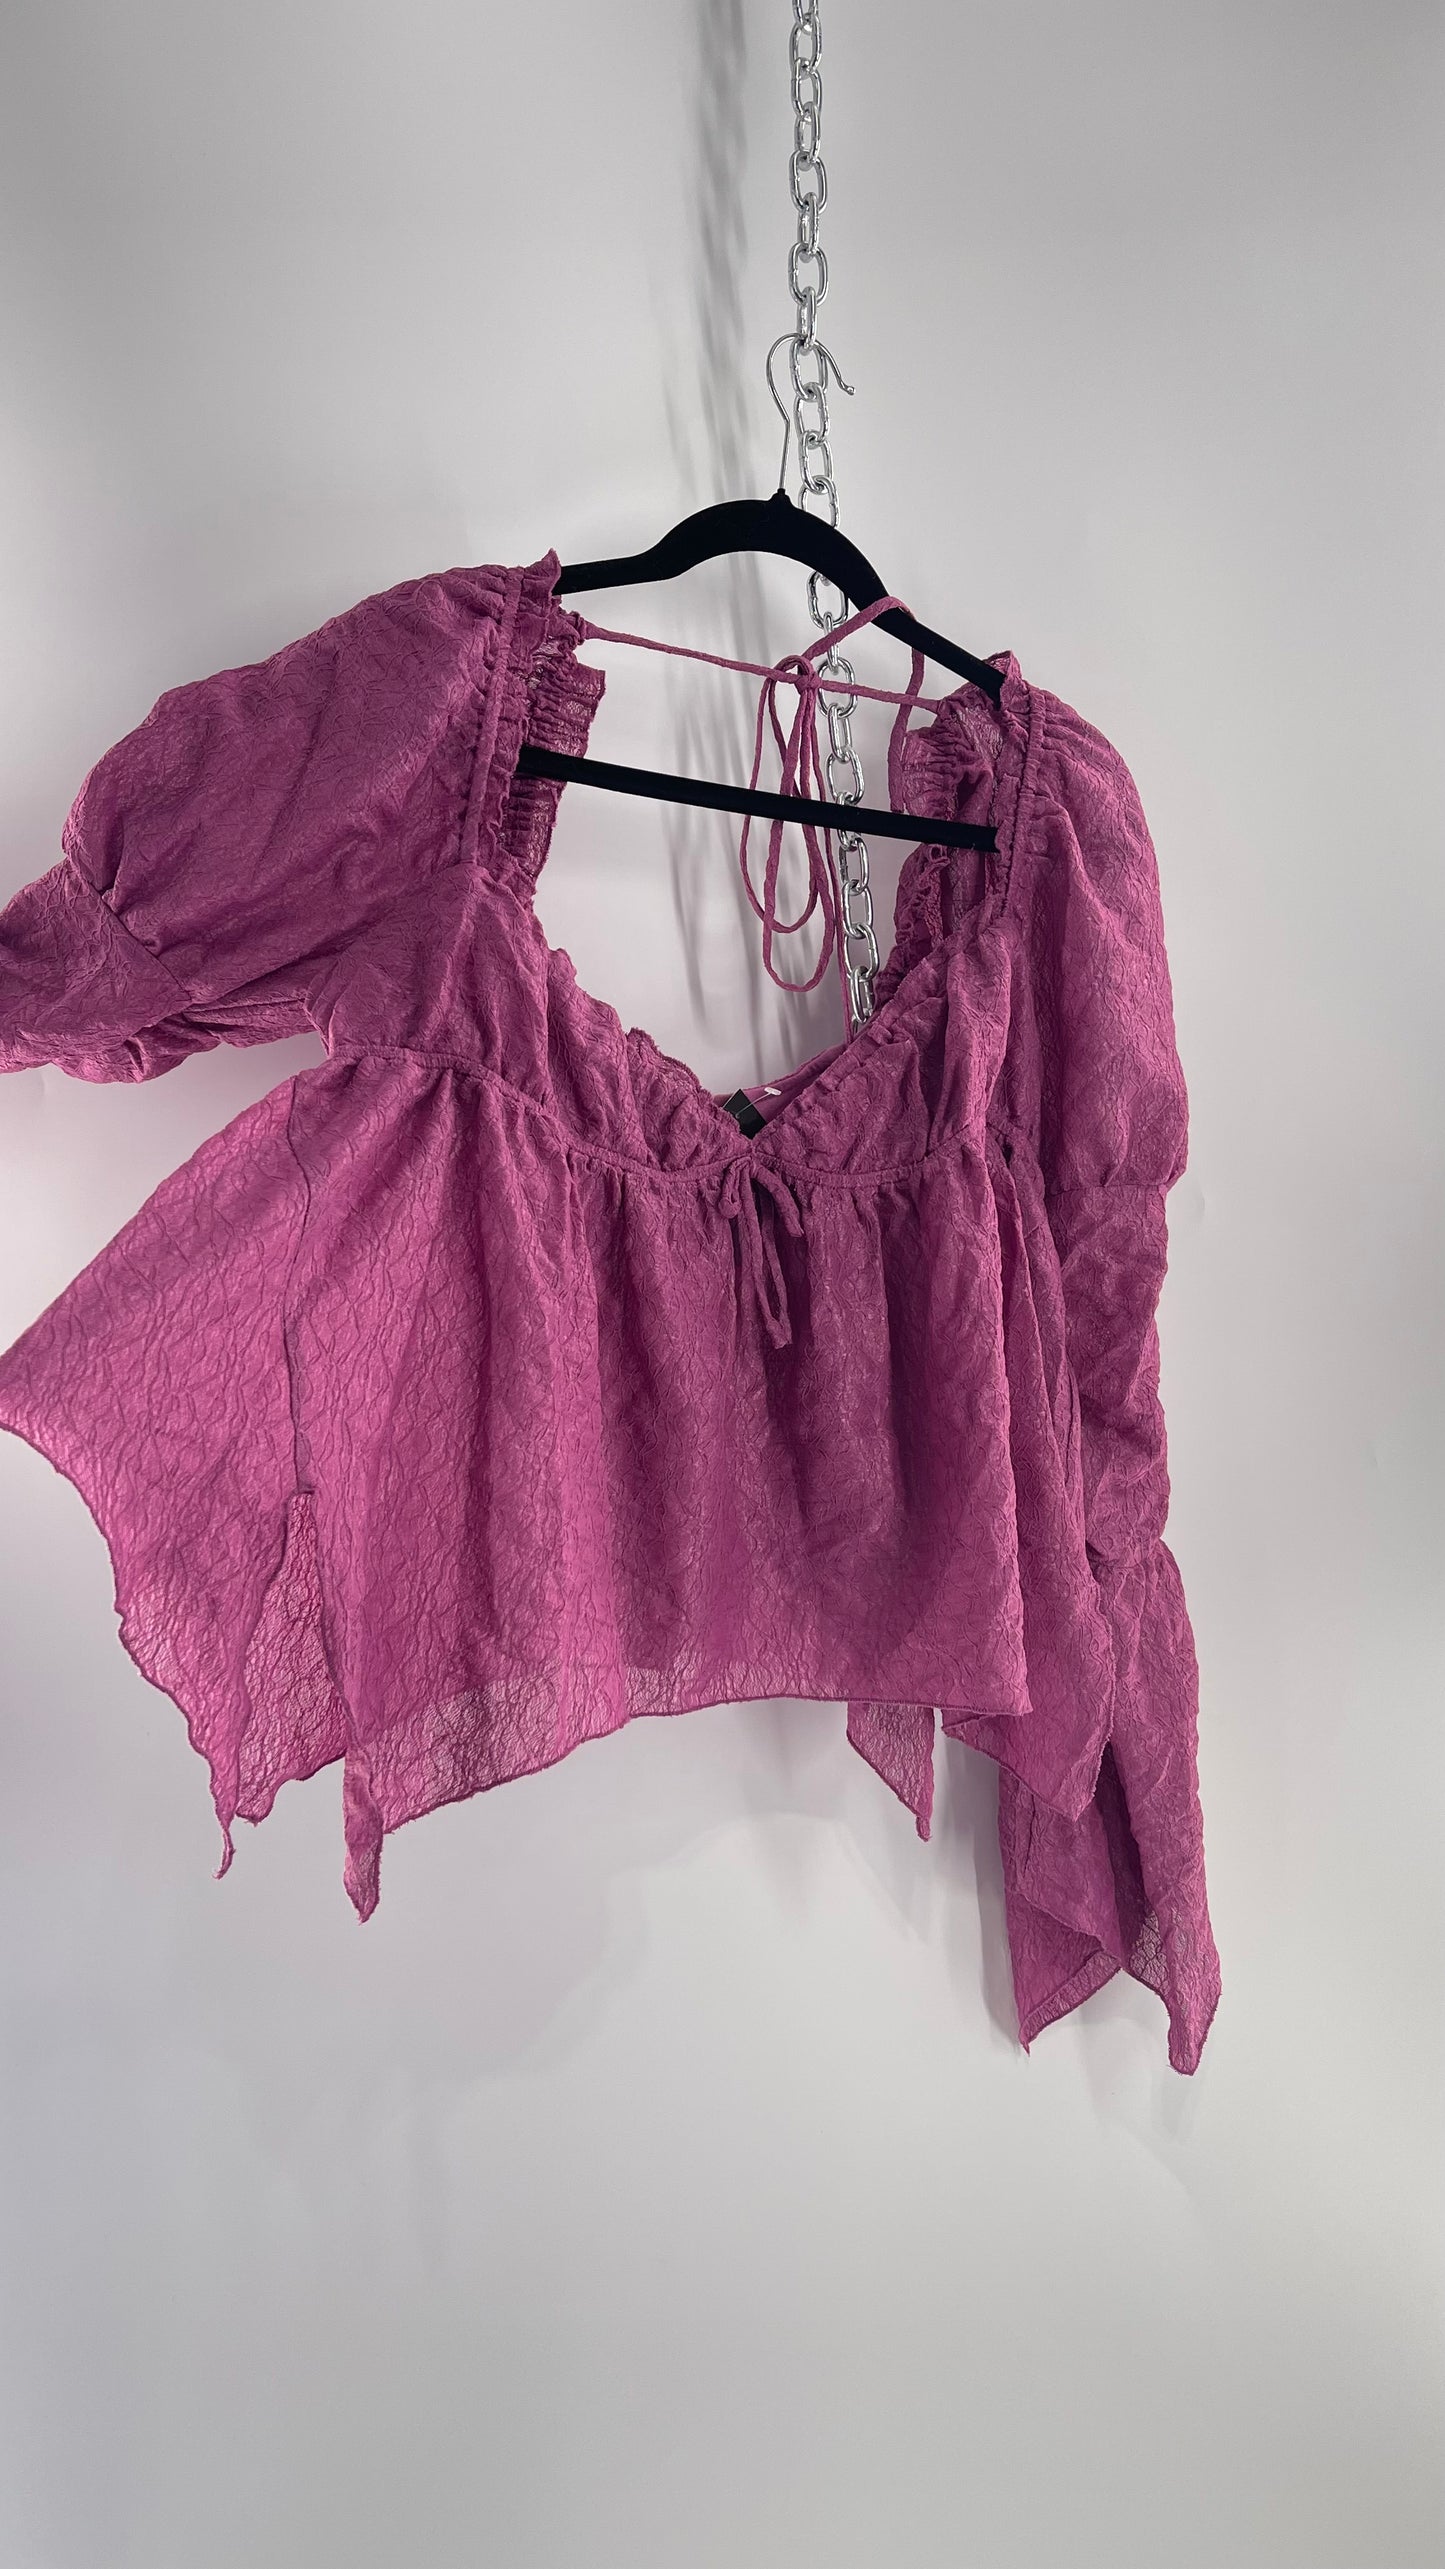 Urban Outfitters Purple Lace Blouse with Handkerchief Slit Hem, Princess Fairy Sleeves, Ruffle Trim Bust and Low Back (Large)